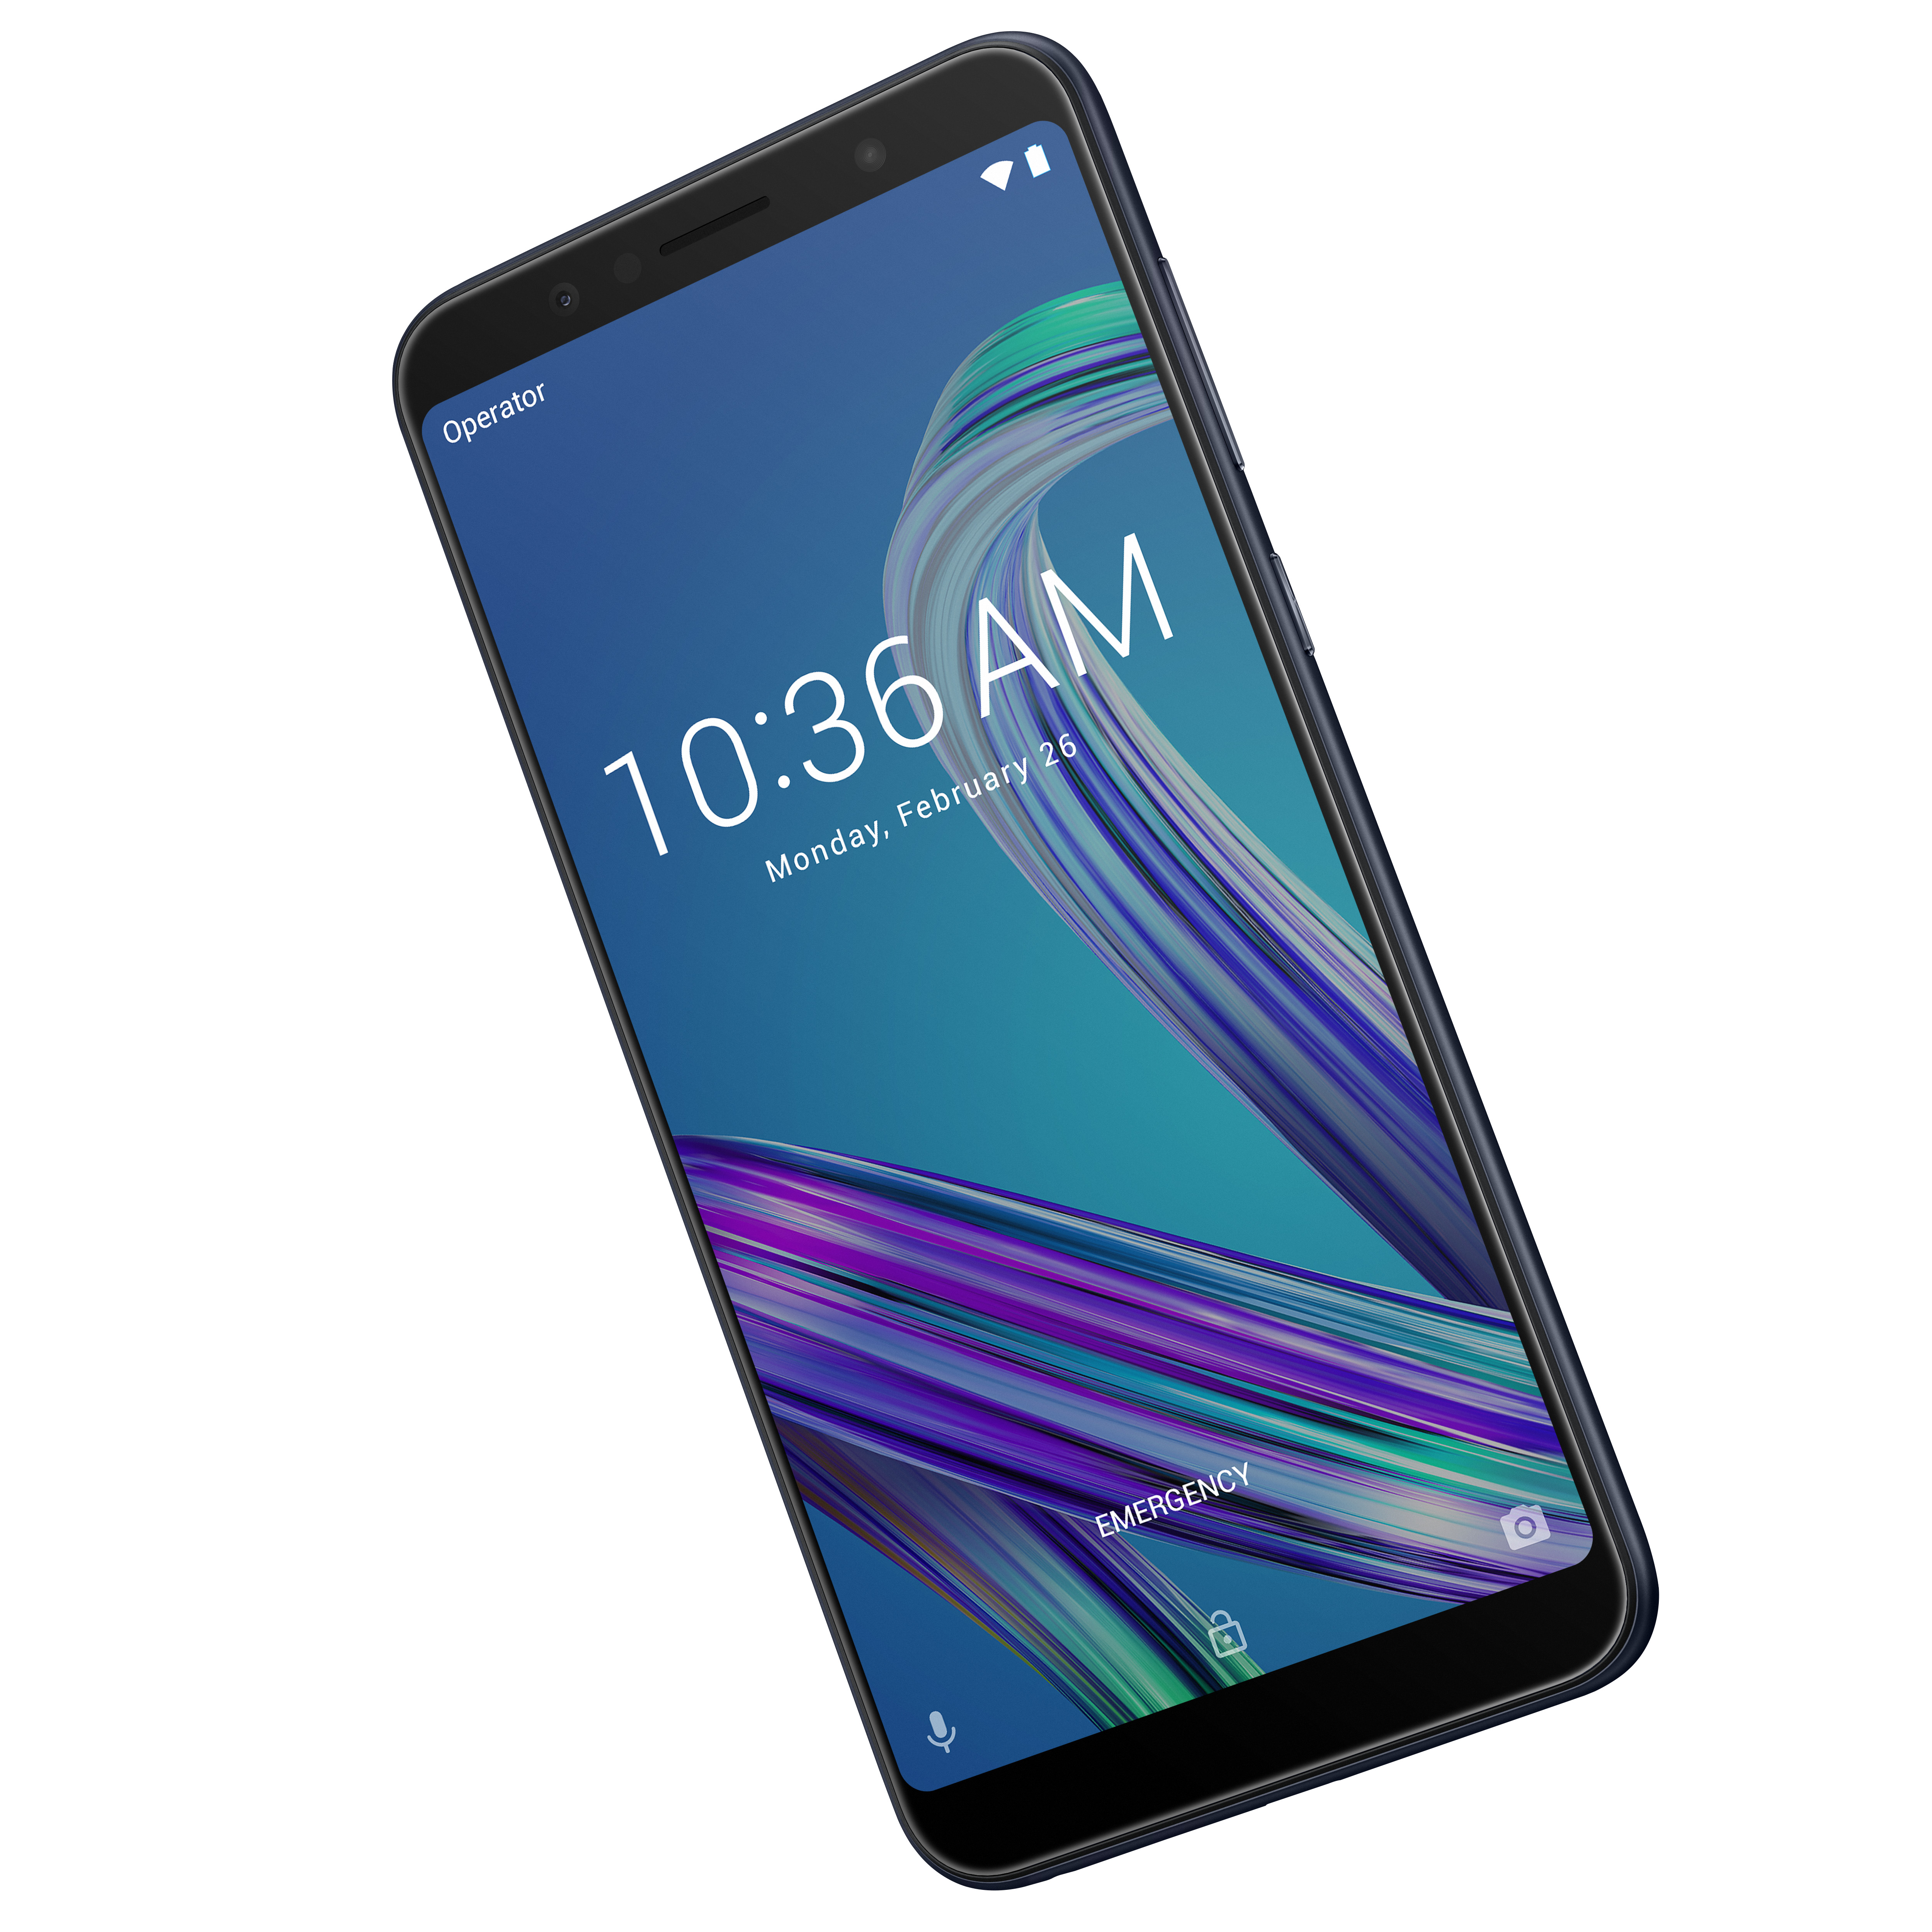 Asus launches ZenFone Max Pro M1 smartphone in India